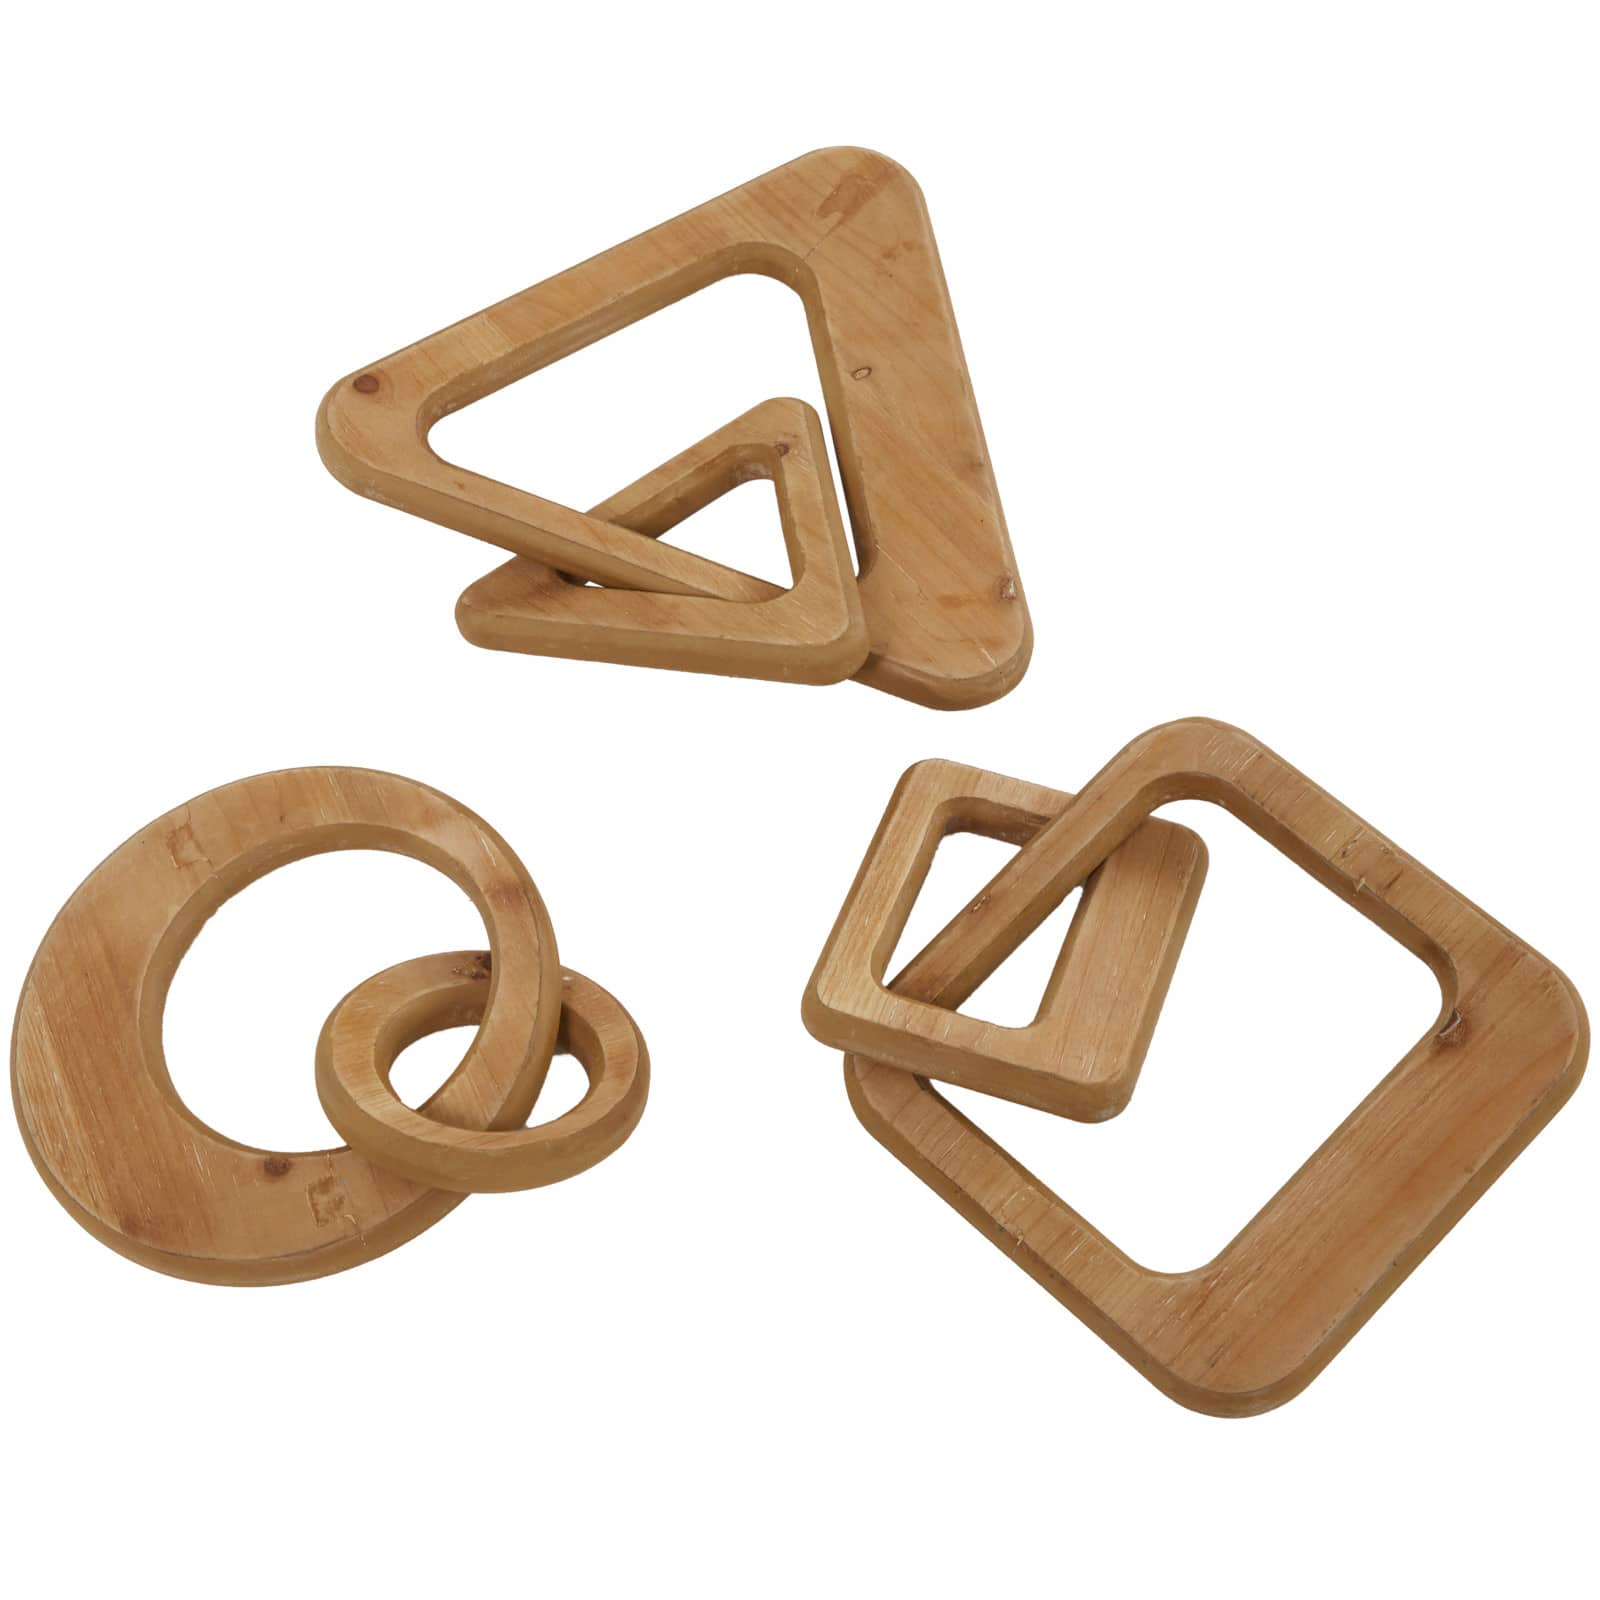 CosmoLiving by Cosmopolitan Wood Chain Sculpture Set